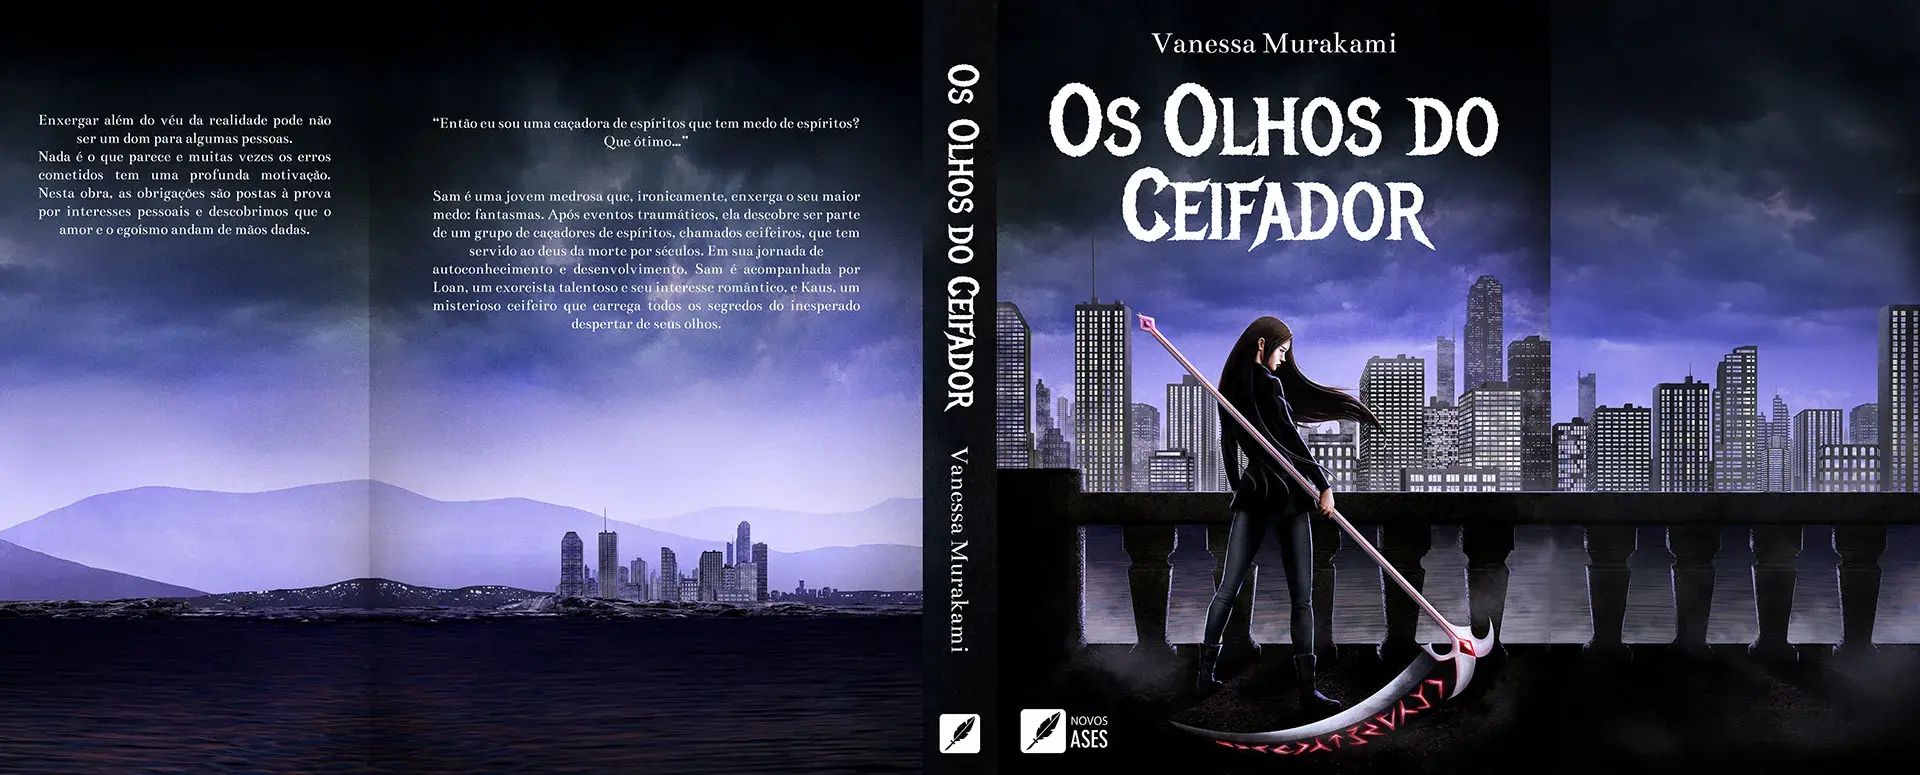 Vanessa Murakami - Capa - Os Olhos do Ceifador - Book Cover Illustrated by André Martins